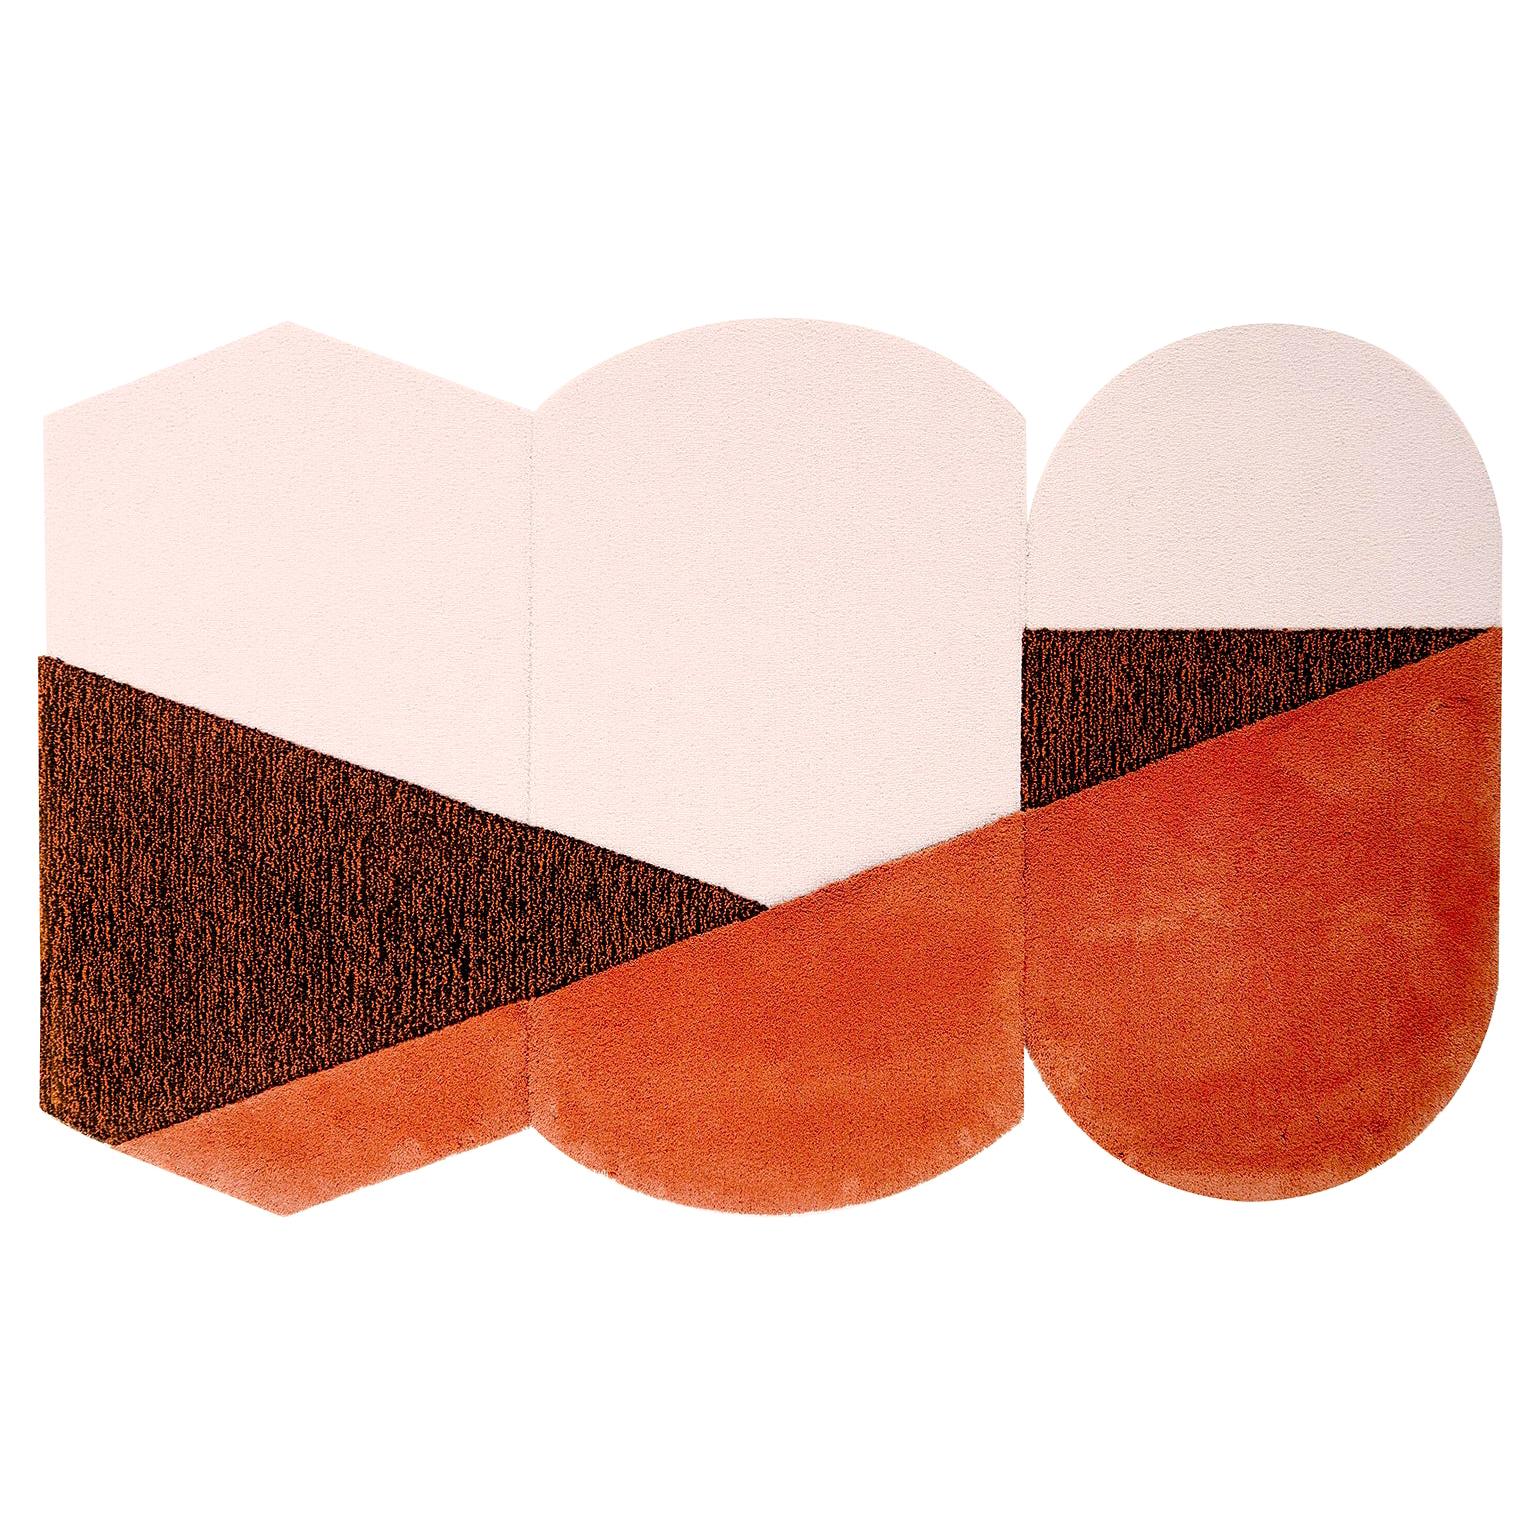 Oci Triptych M, Composition of 3 Rugs 100% Wool / Brick Brown Pink by Portego For Sale